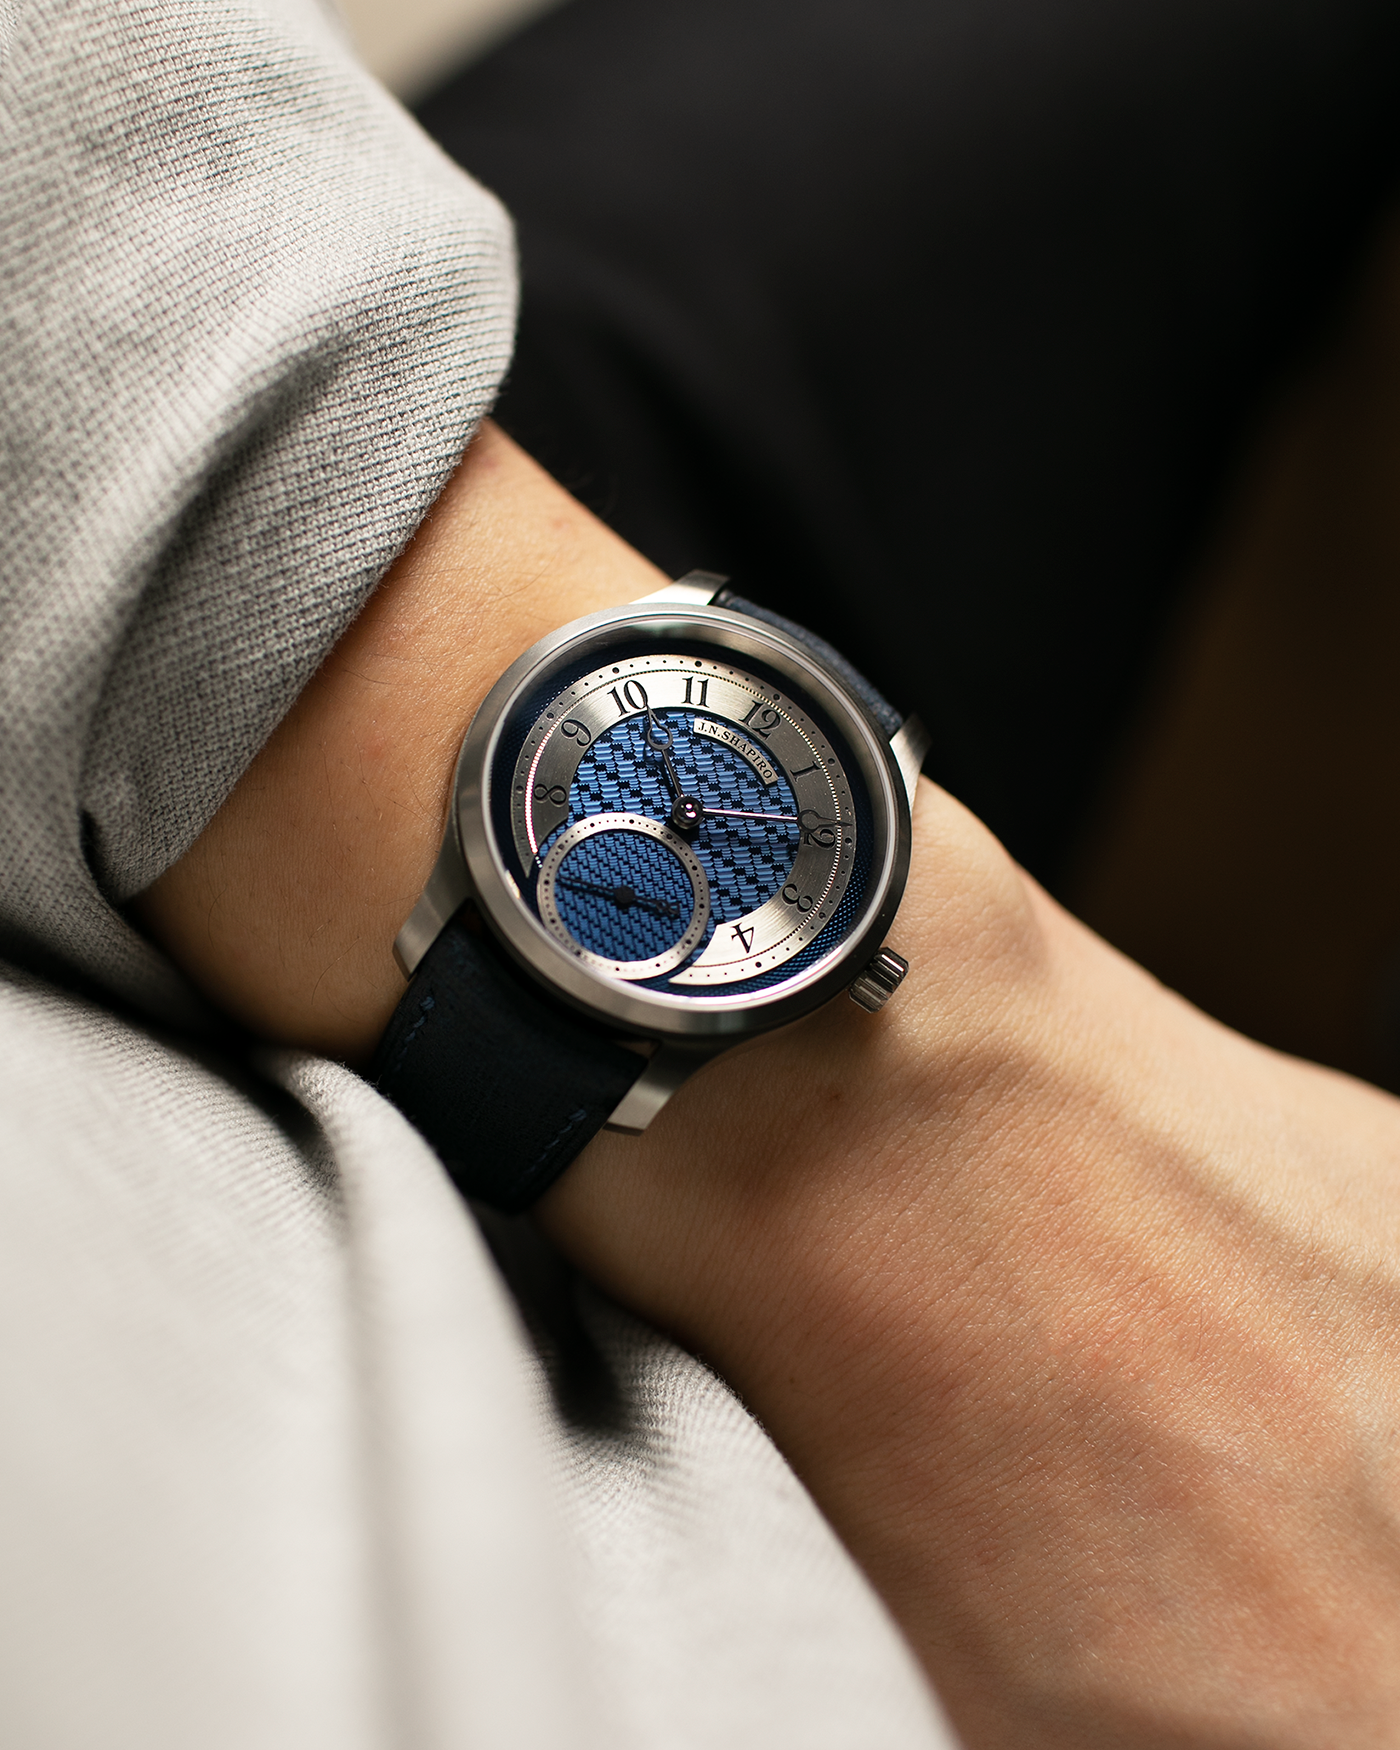 Brand: J.N. Shapiro Year: 2023 Model: Infinity Series Titanium Material: Titanium Case, Silver Dial, White Gold Hands Movement: UWD Cal. 33.1, Manual-Winding Case Dimensions: 39mm x 9.75mm Lug Width: 20mm Strap: J.N. Shapiro by Delugs Navy Blue Leather Strap with Signed Titanium Tang Buckle